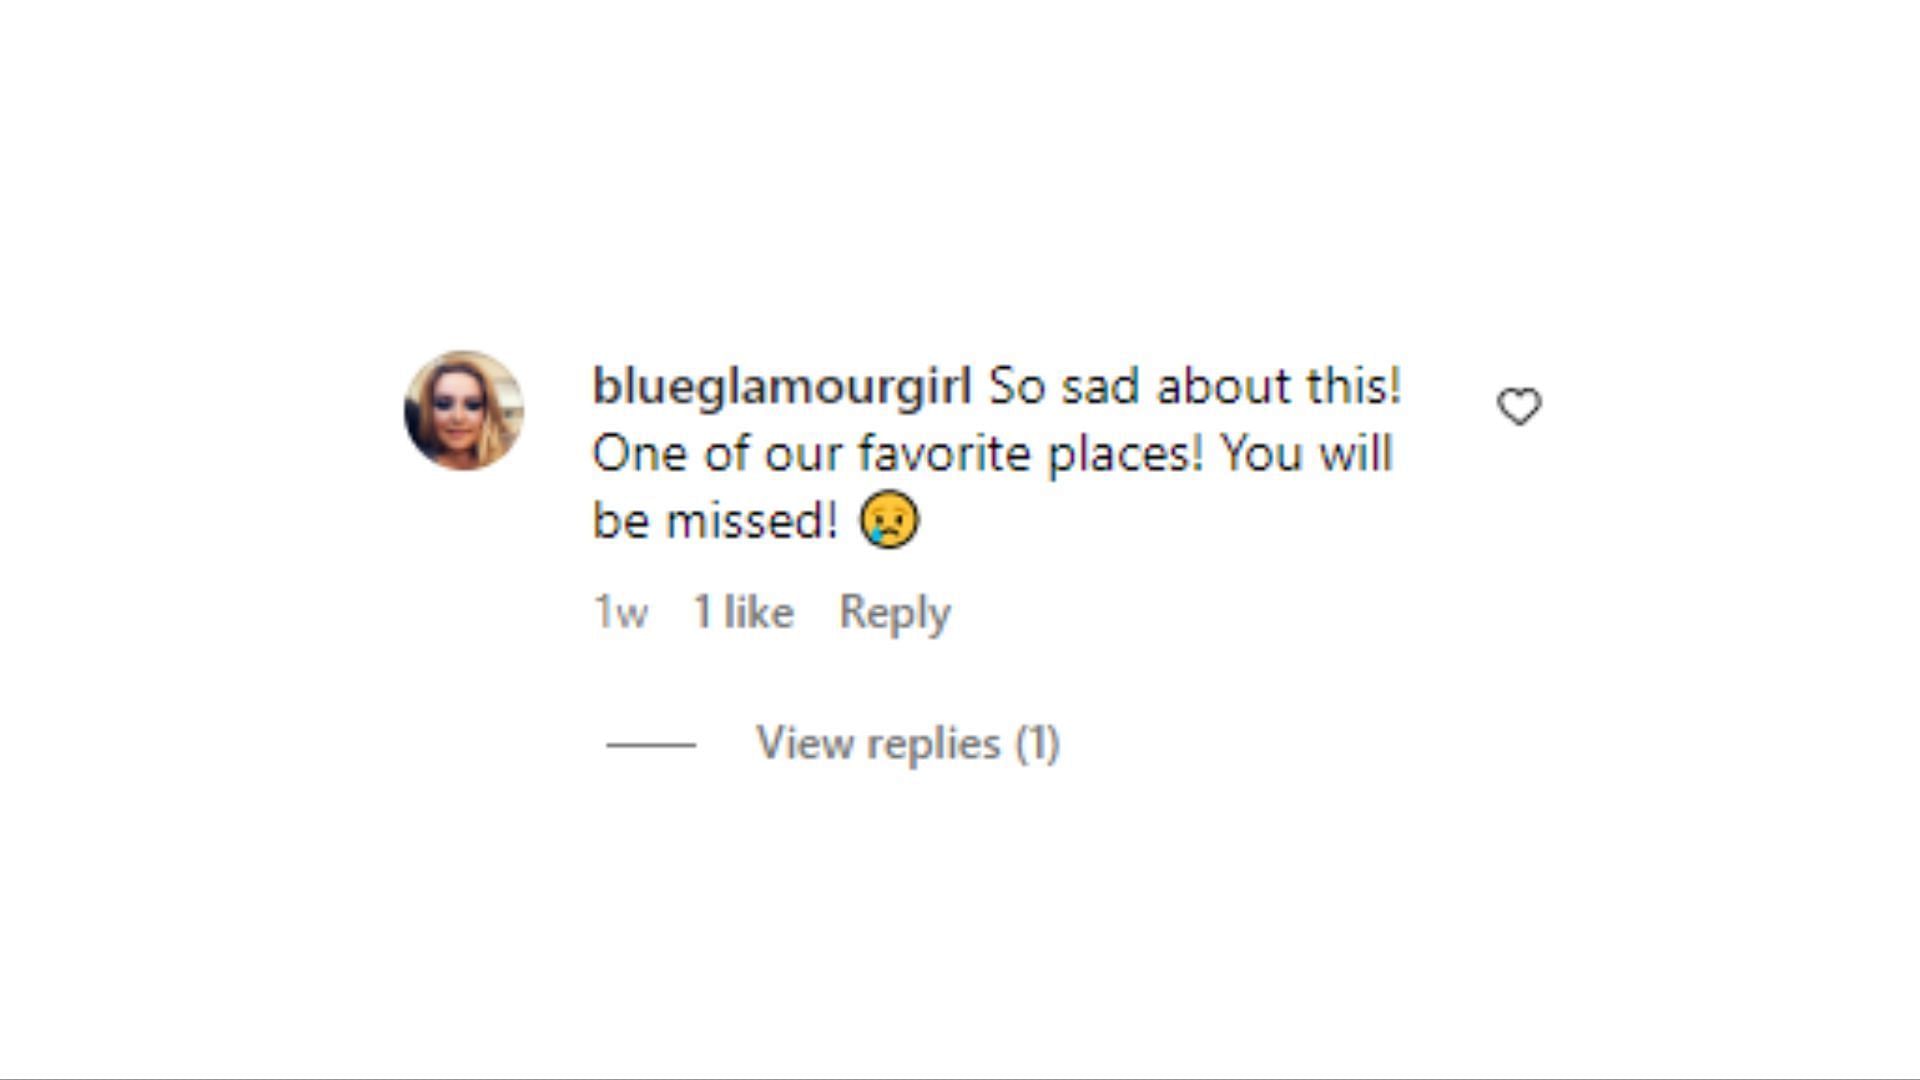 comment by the user @blueglamourgirl on Instagram (Image via Instagram)